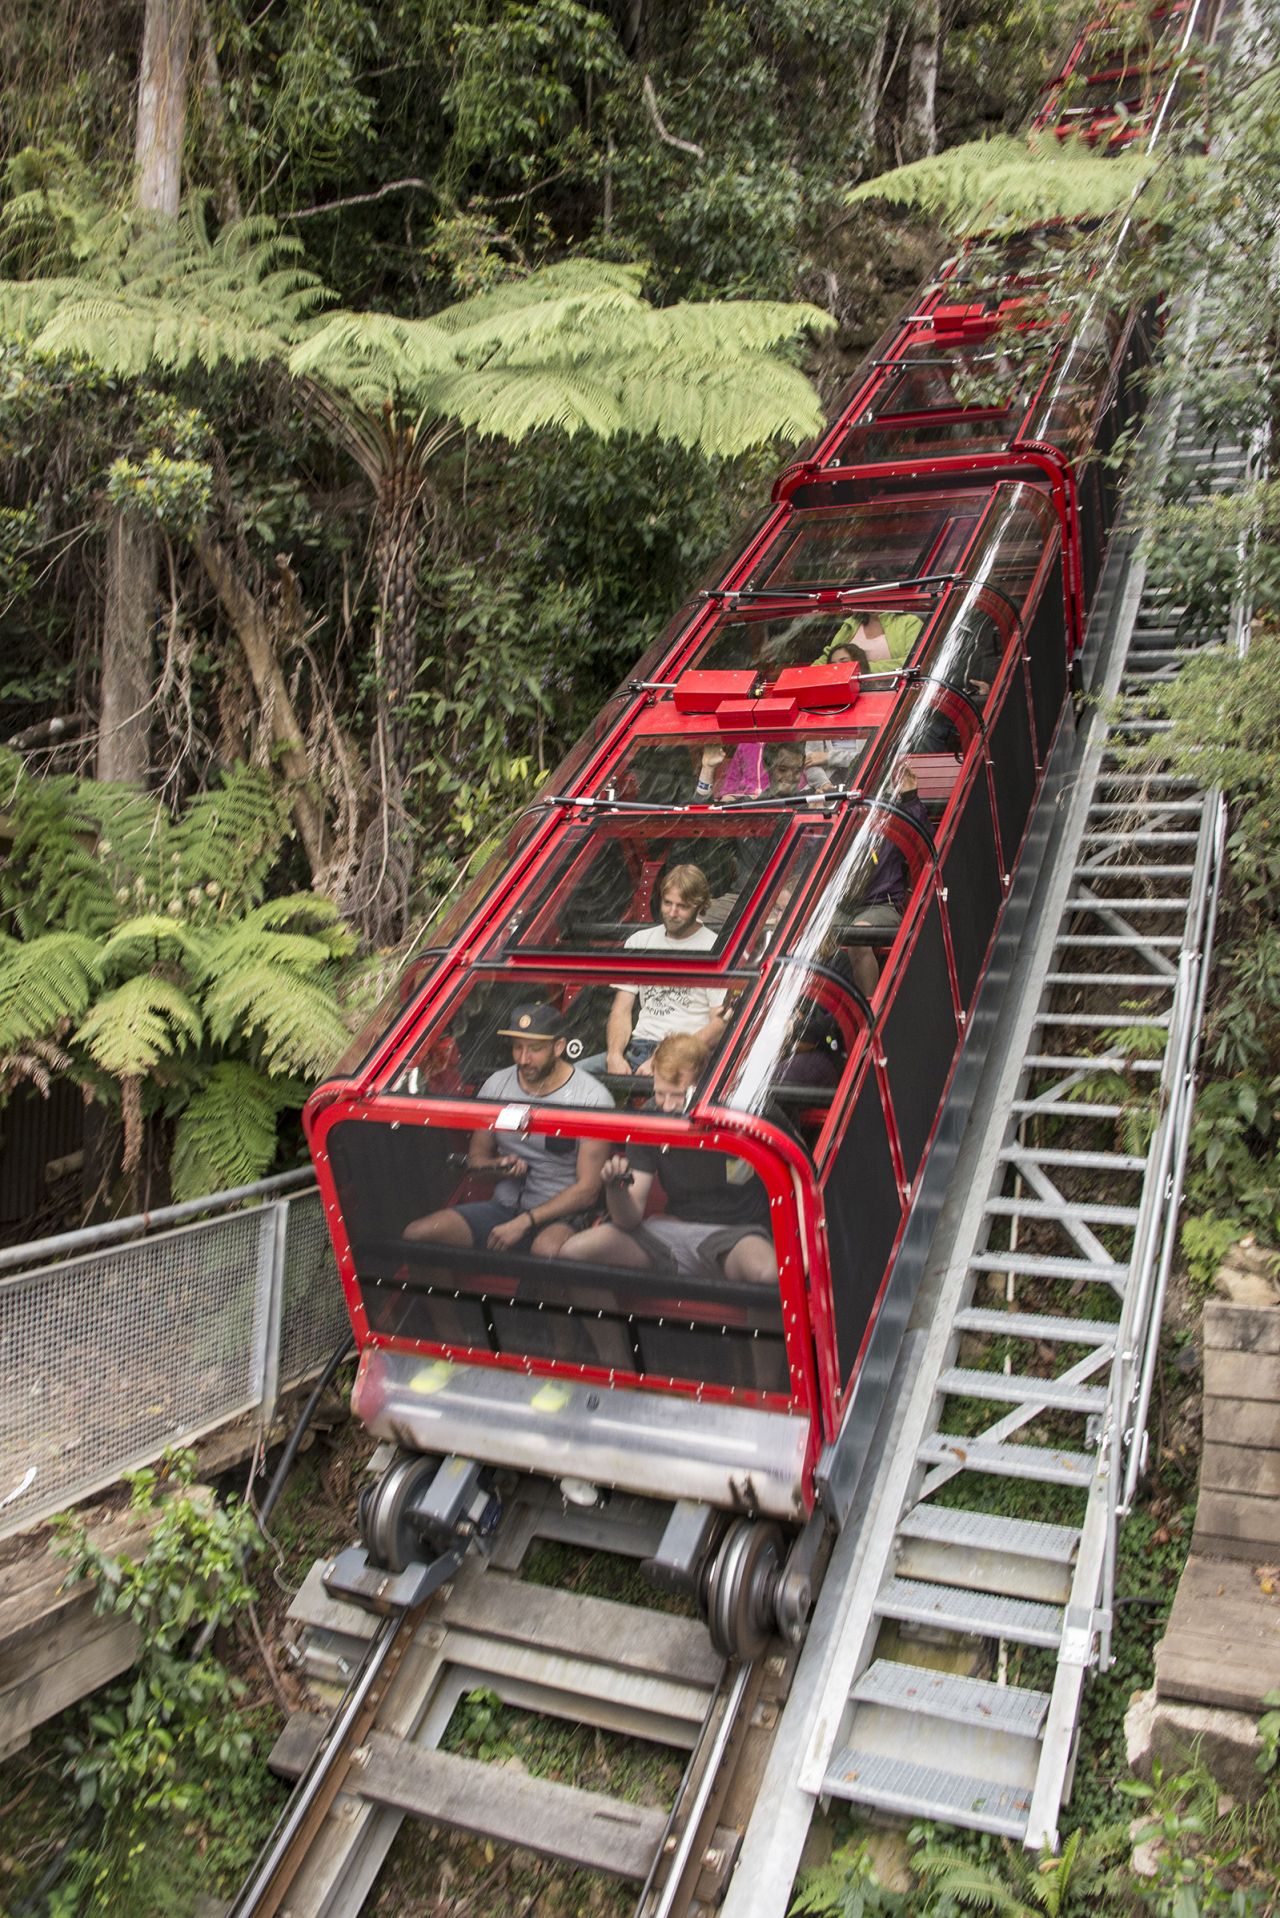 <strong>Katoomba Scenic Railway, Australia: </strong>This railway delivers a thrilling descent down sandstone cliffs and through epic rock formations and tunnels perched over a stunning rainforest landscape. 